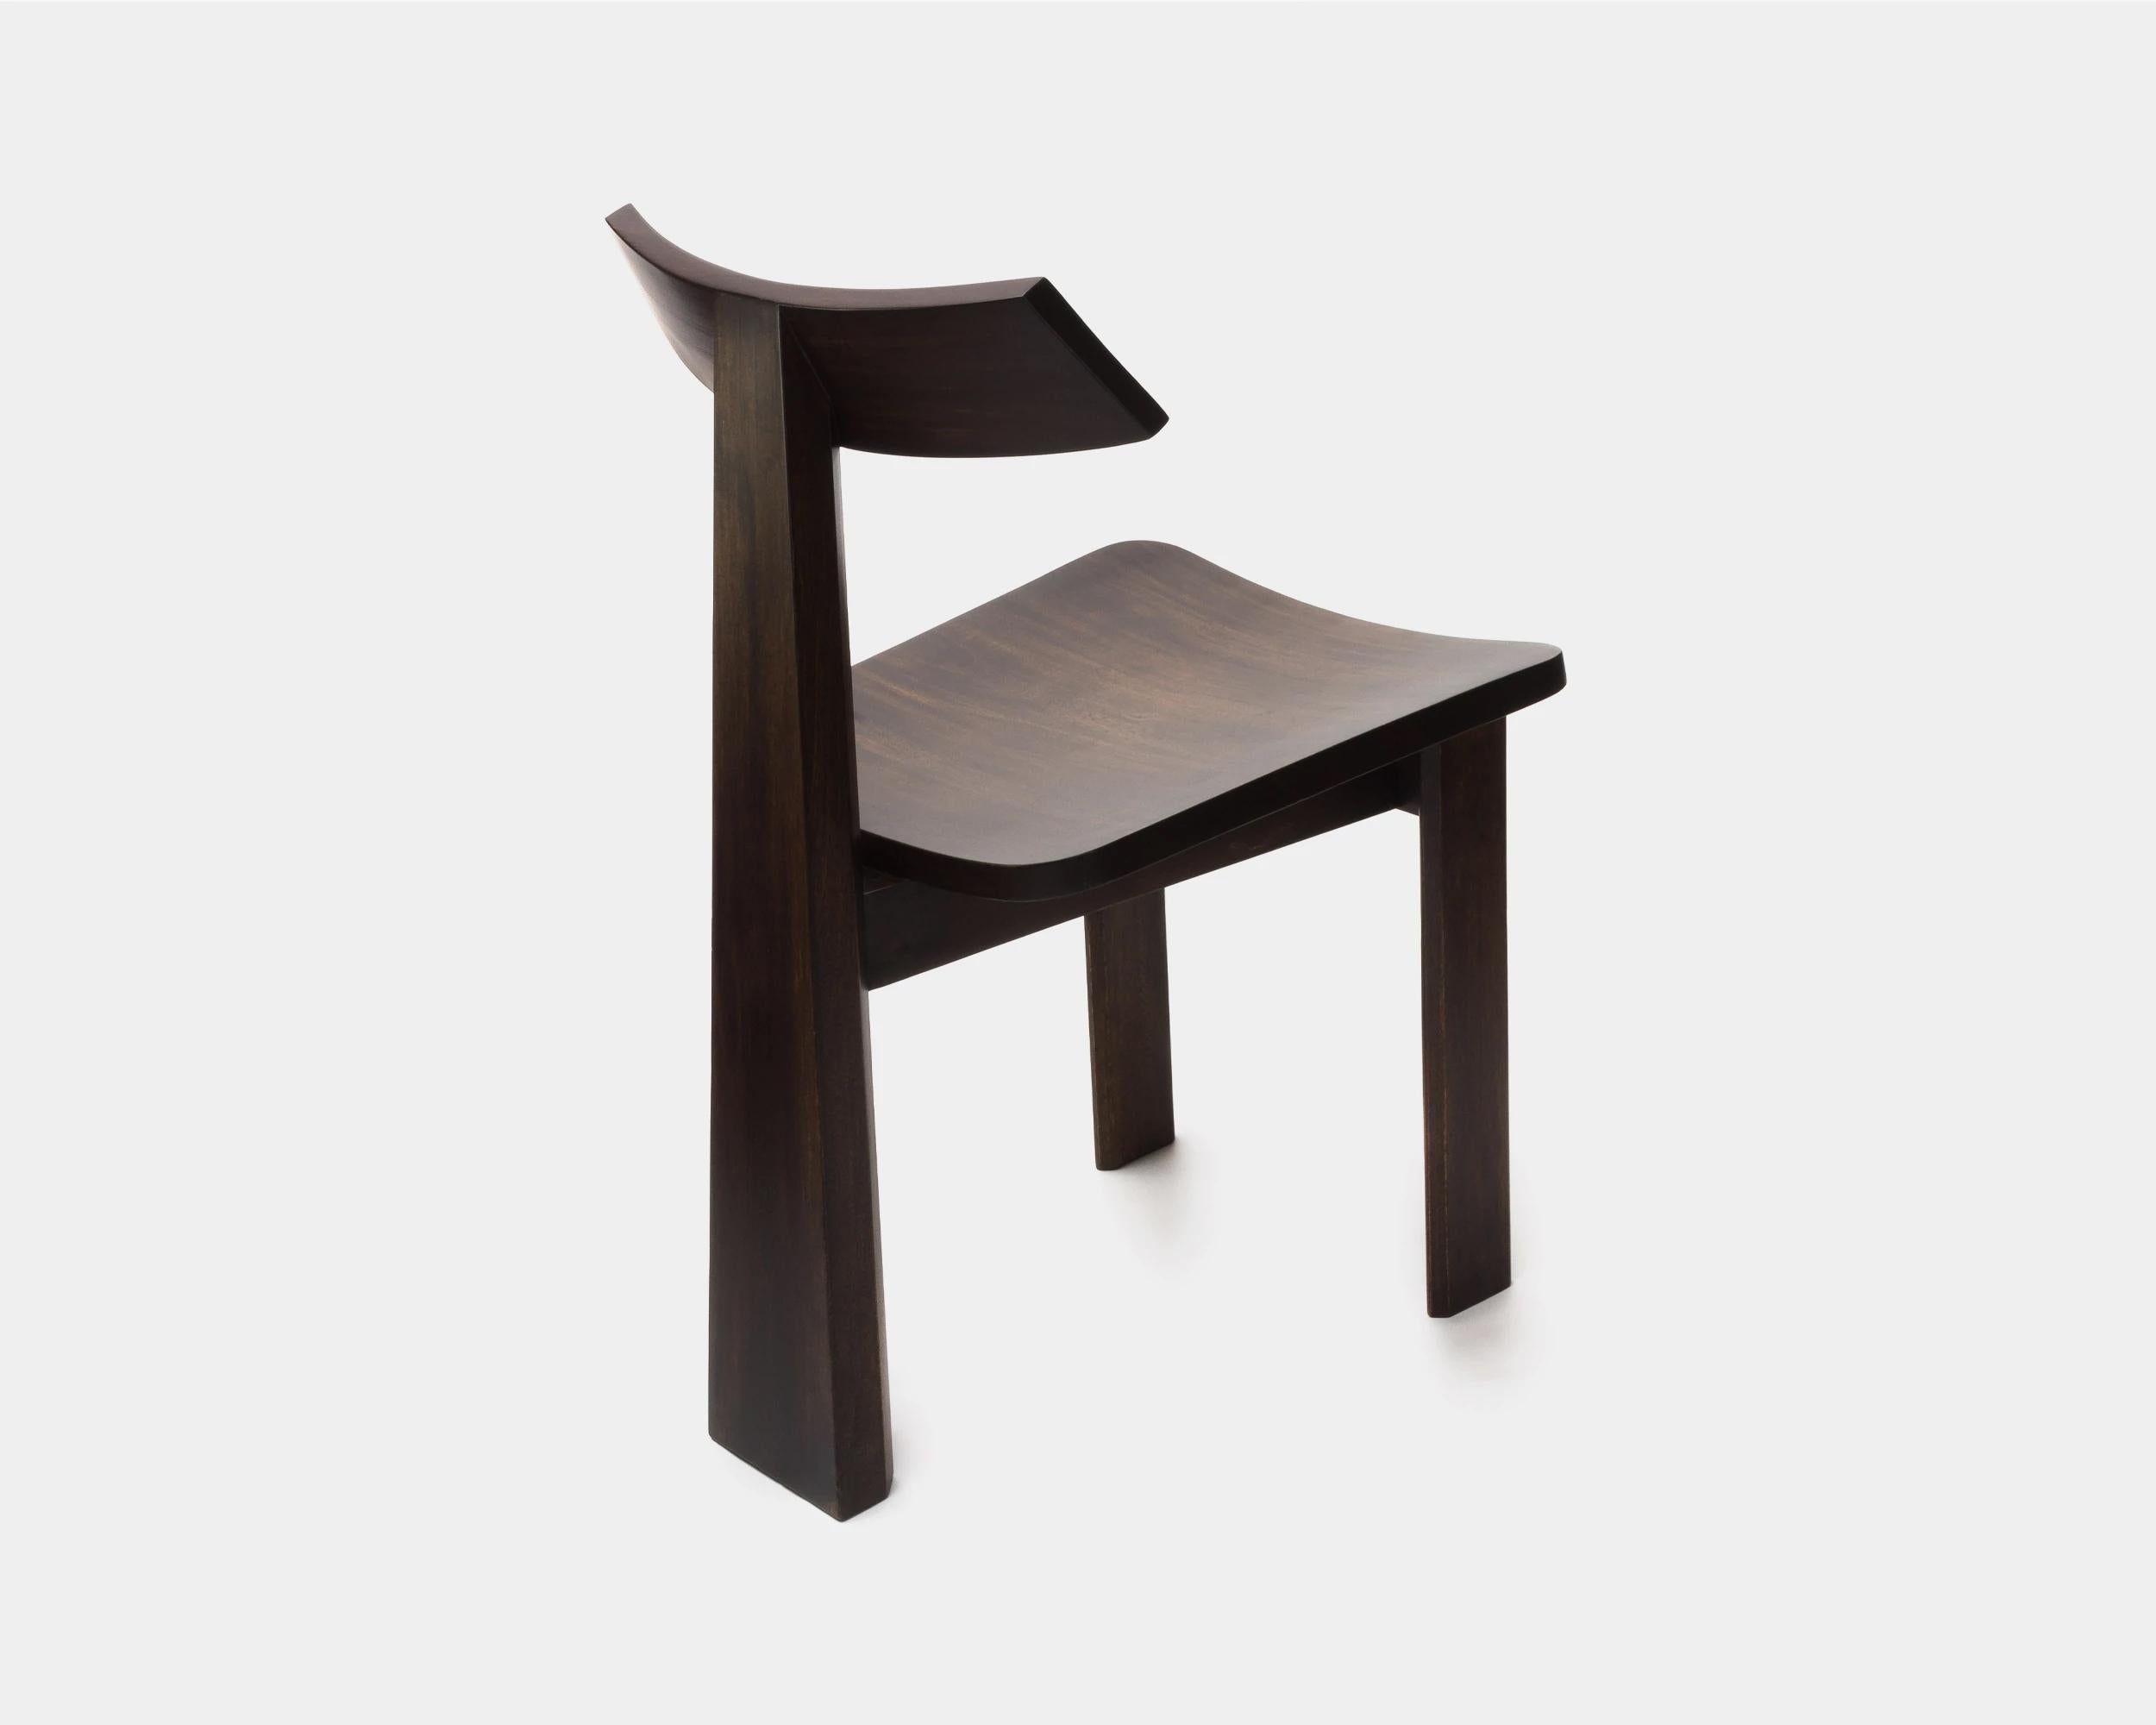 Dining chair DAGON by Camilo Andres Rodriguez Marquez (aka CarmWorks)

Solid oak or cedar / Burnt wood or natural

Each piece is made to order and hand crafted by the artist.

--
Camilo Andres Rodriguez Marquez is a Colombian born designer